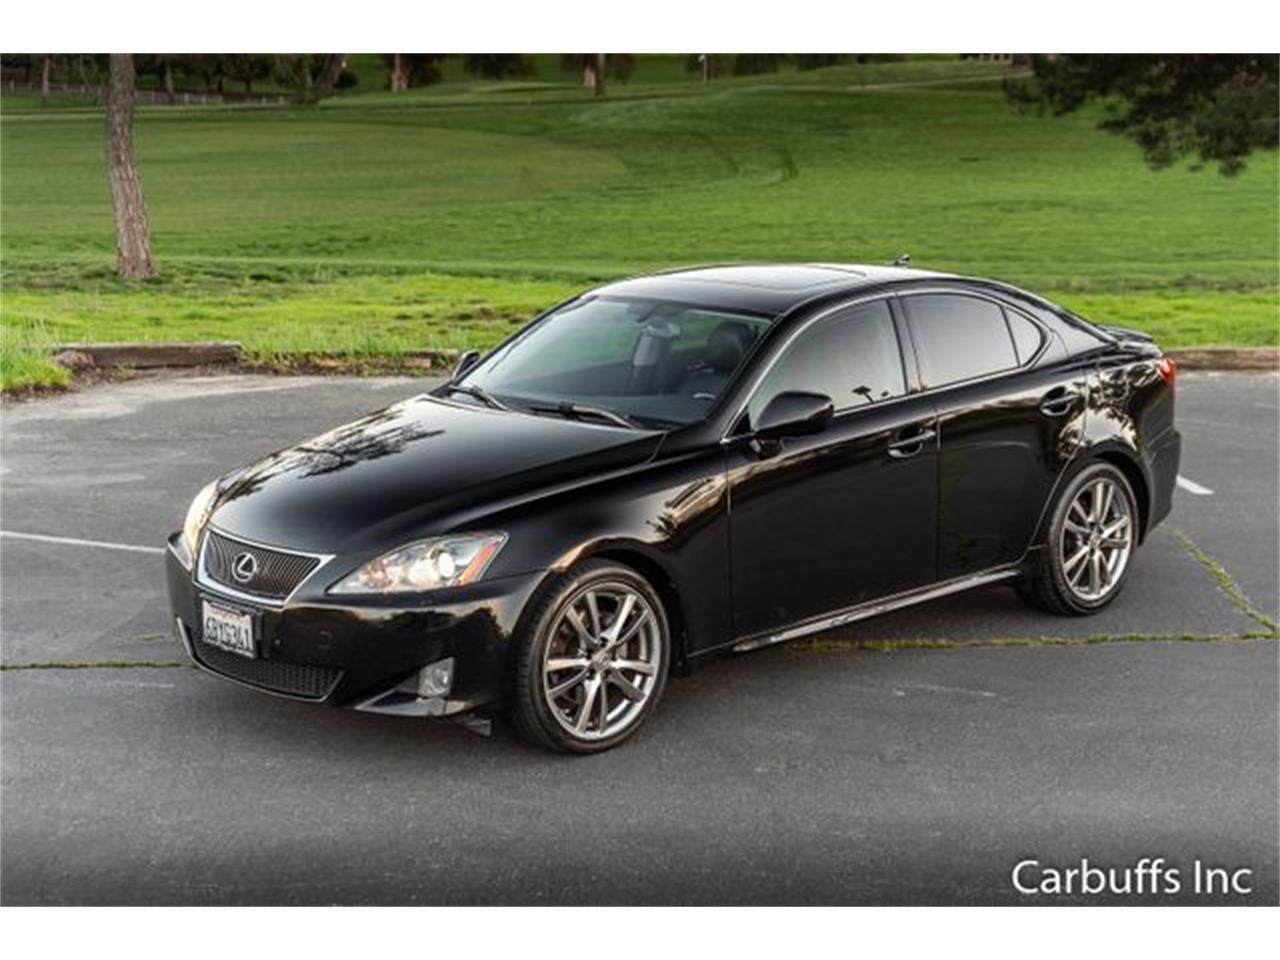 2008 Lexus IS250 for sale in Concord, CA /